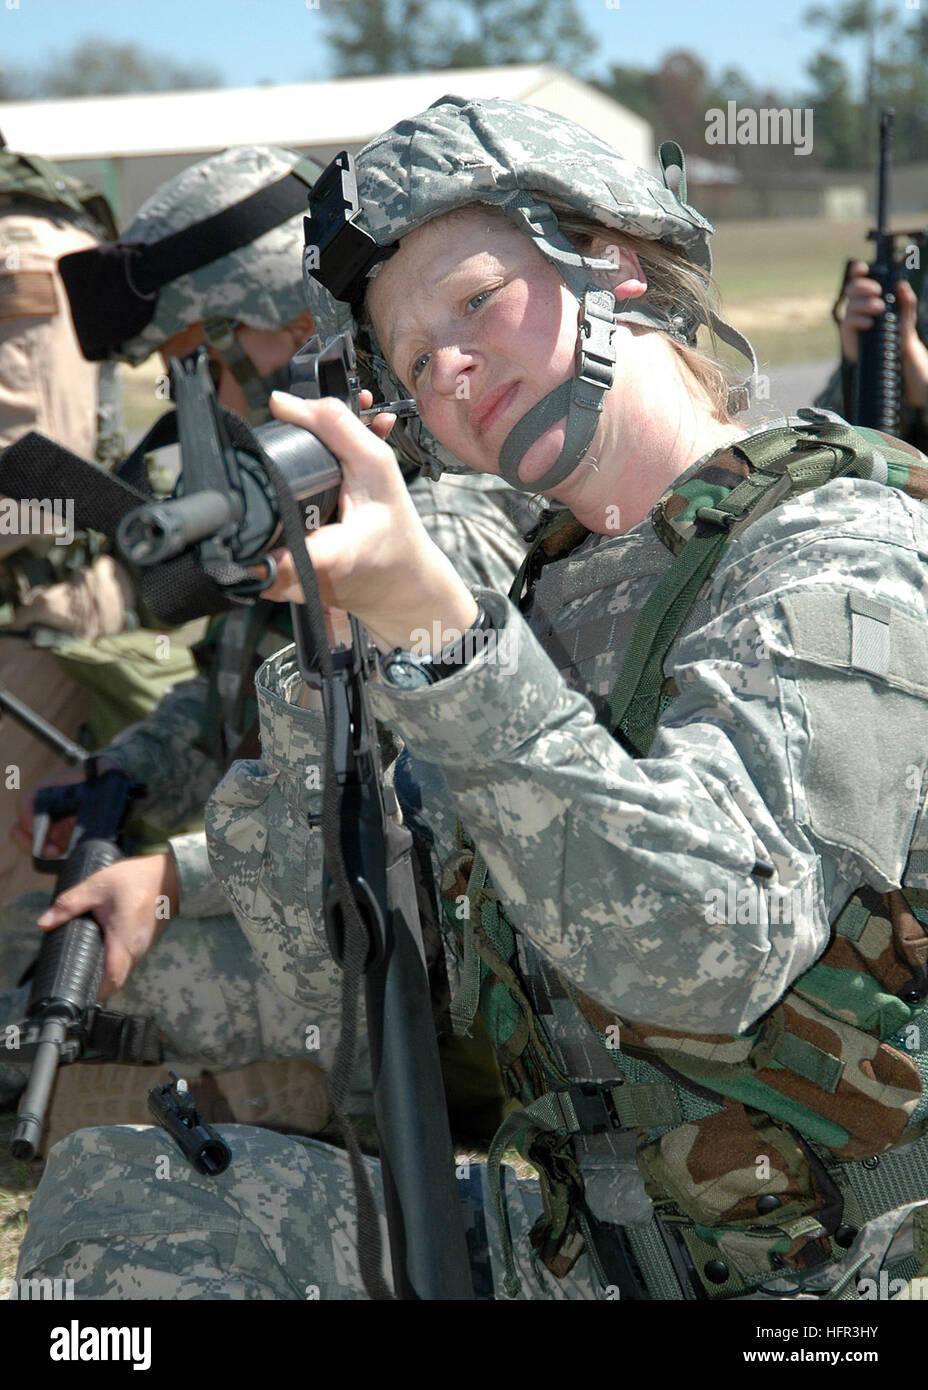 060314-N-0057D-021 Fort Jackson, S.C. (March 14, 2006) Ð Lt. Cdr. Karen Little, assigned to the Naval Inventory Control Point (NAVICP), Philadelphia, inspects the muzzle of her M16A1 rifle during an Individual Augmentee Training Course at the McCrady Training Center. The Sailors are conducting training prior to deploying in support of Operation Enduring Freedom. U.S. Navy photo by photographerÕs Mate 1st class Timm Duckworth (RELEASED) US Navy 060314-N-0057D-021 Lt. Cdr. Karen Little, assigned to the Naval Inventory Control Point (NAVICP), Philadelphia, inspects the muzzle of her M16A1 rifle d Stock Photo